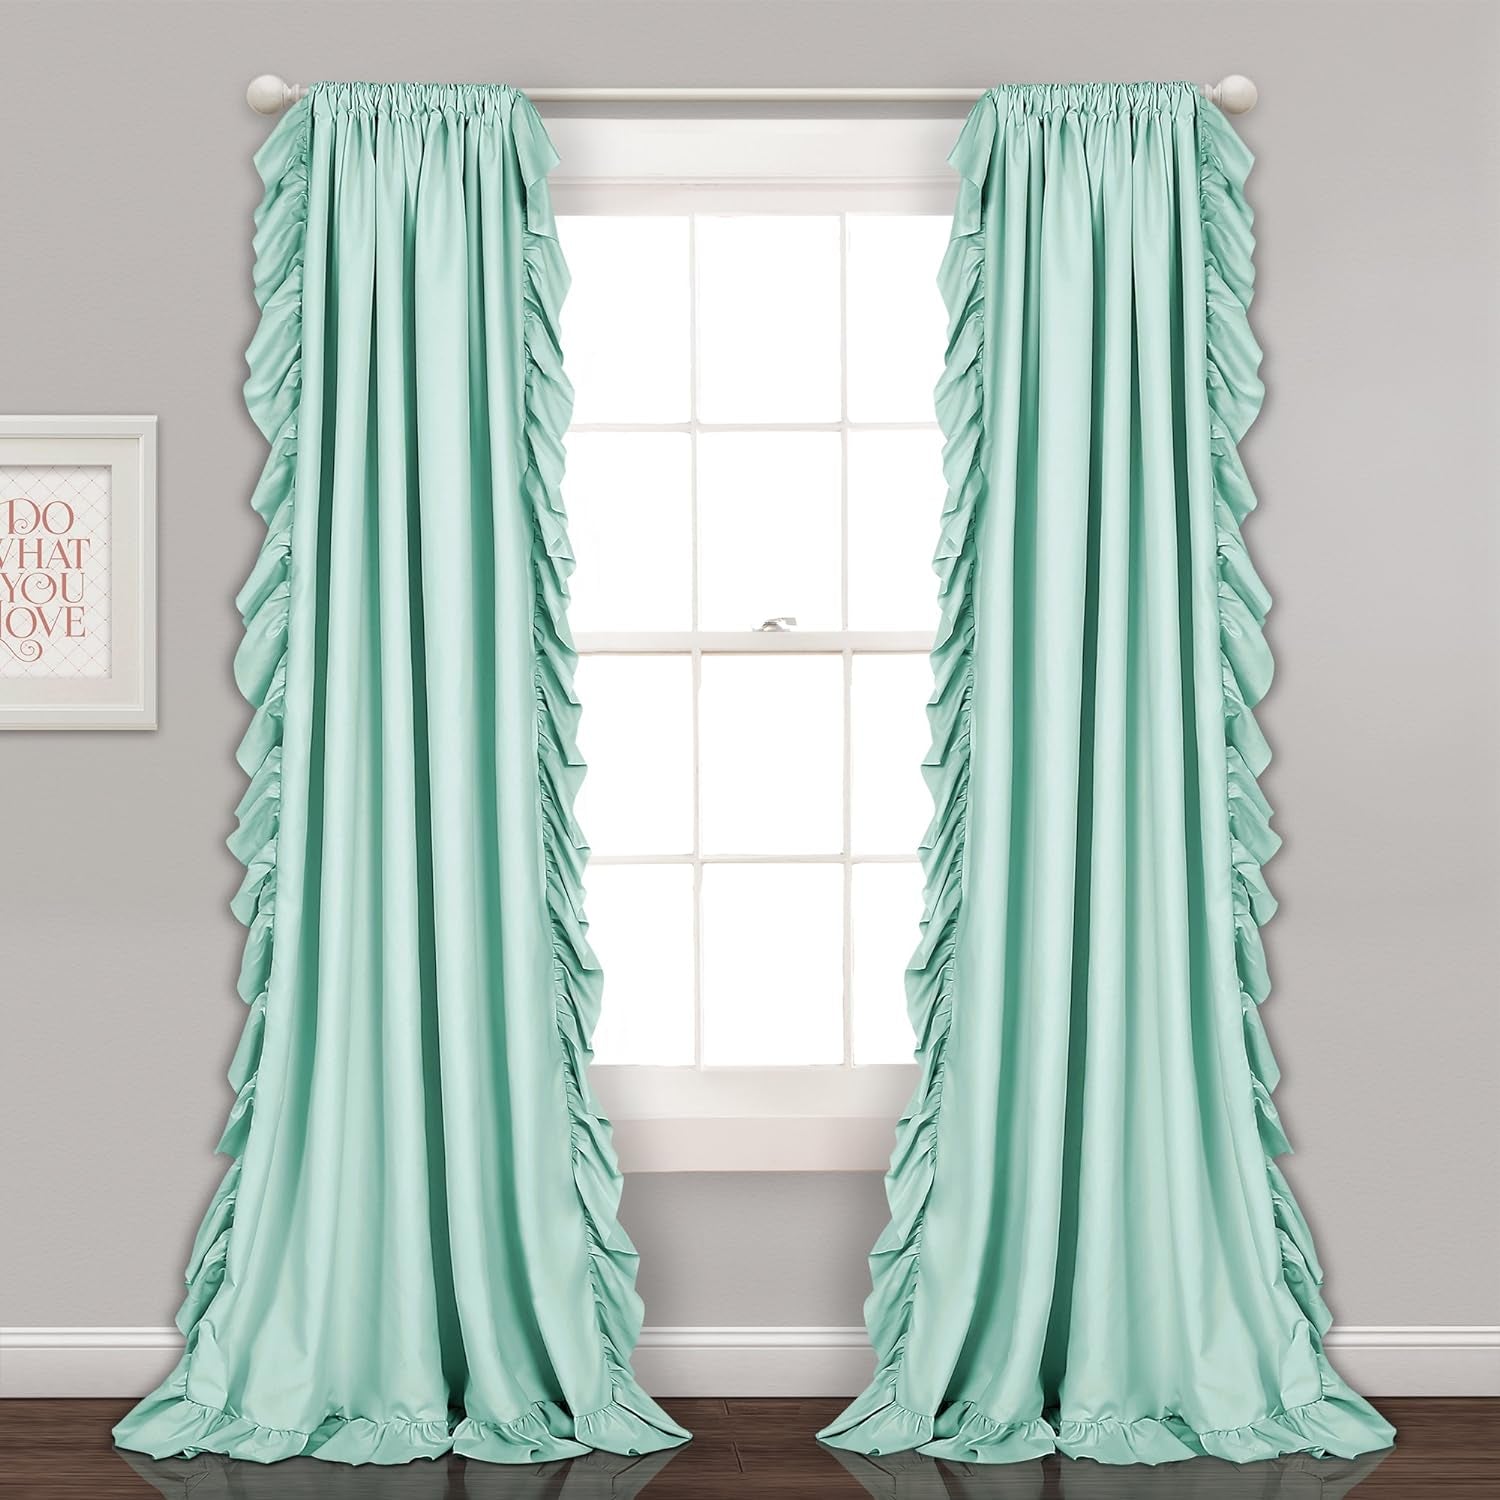 Reyna Ruffle Window Curtain Panel Set for Living, Dining, Bedroom (Pair), 54"W X 84"L, Light Blue